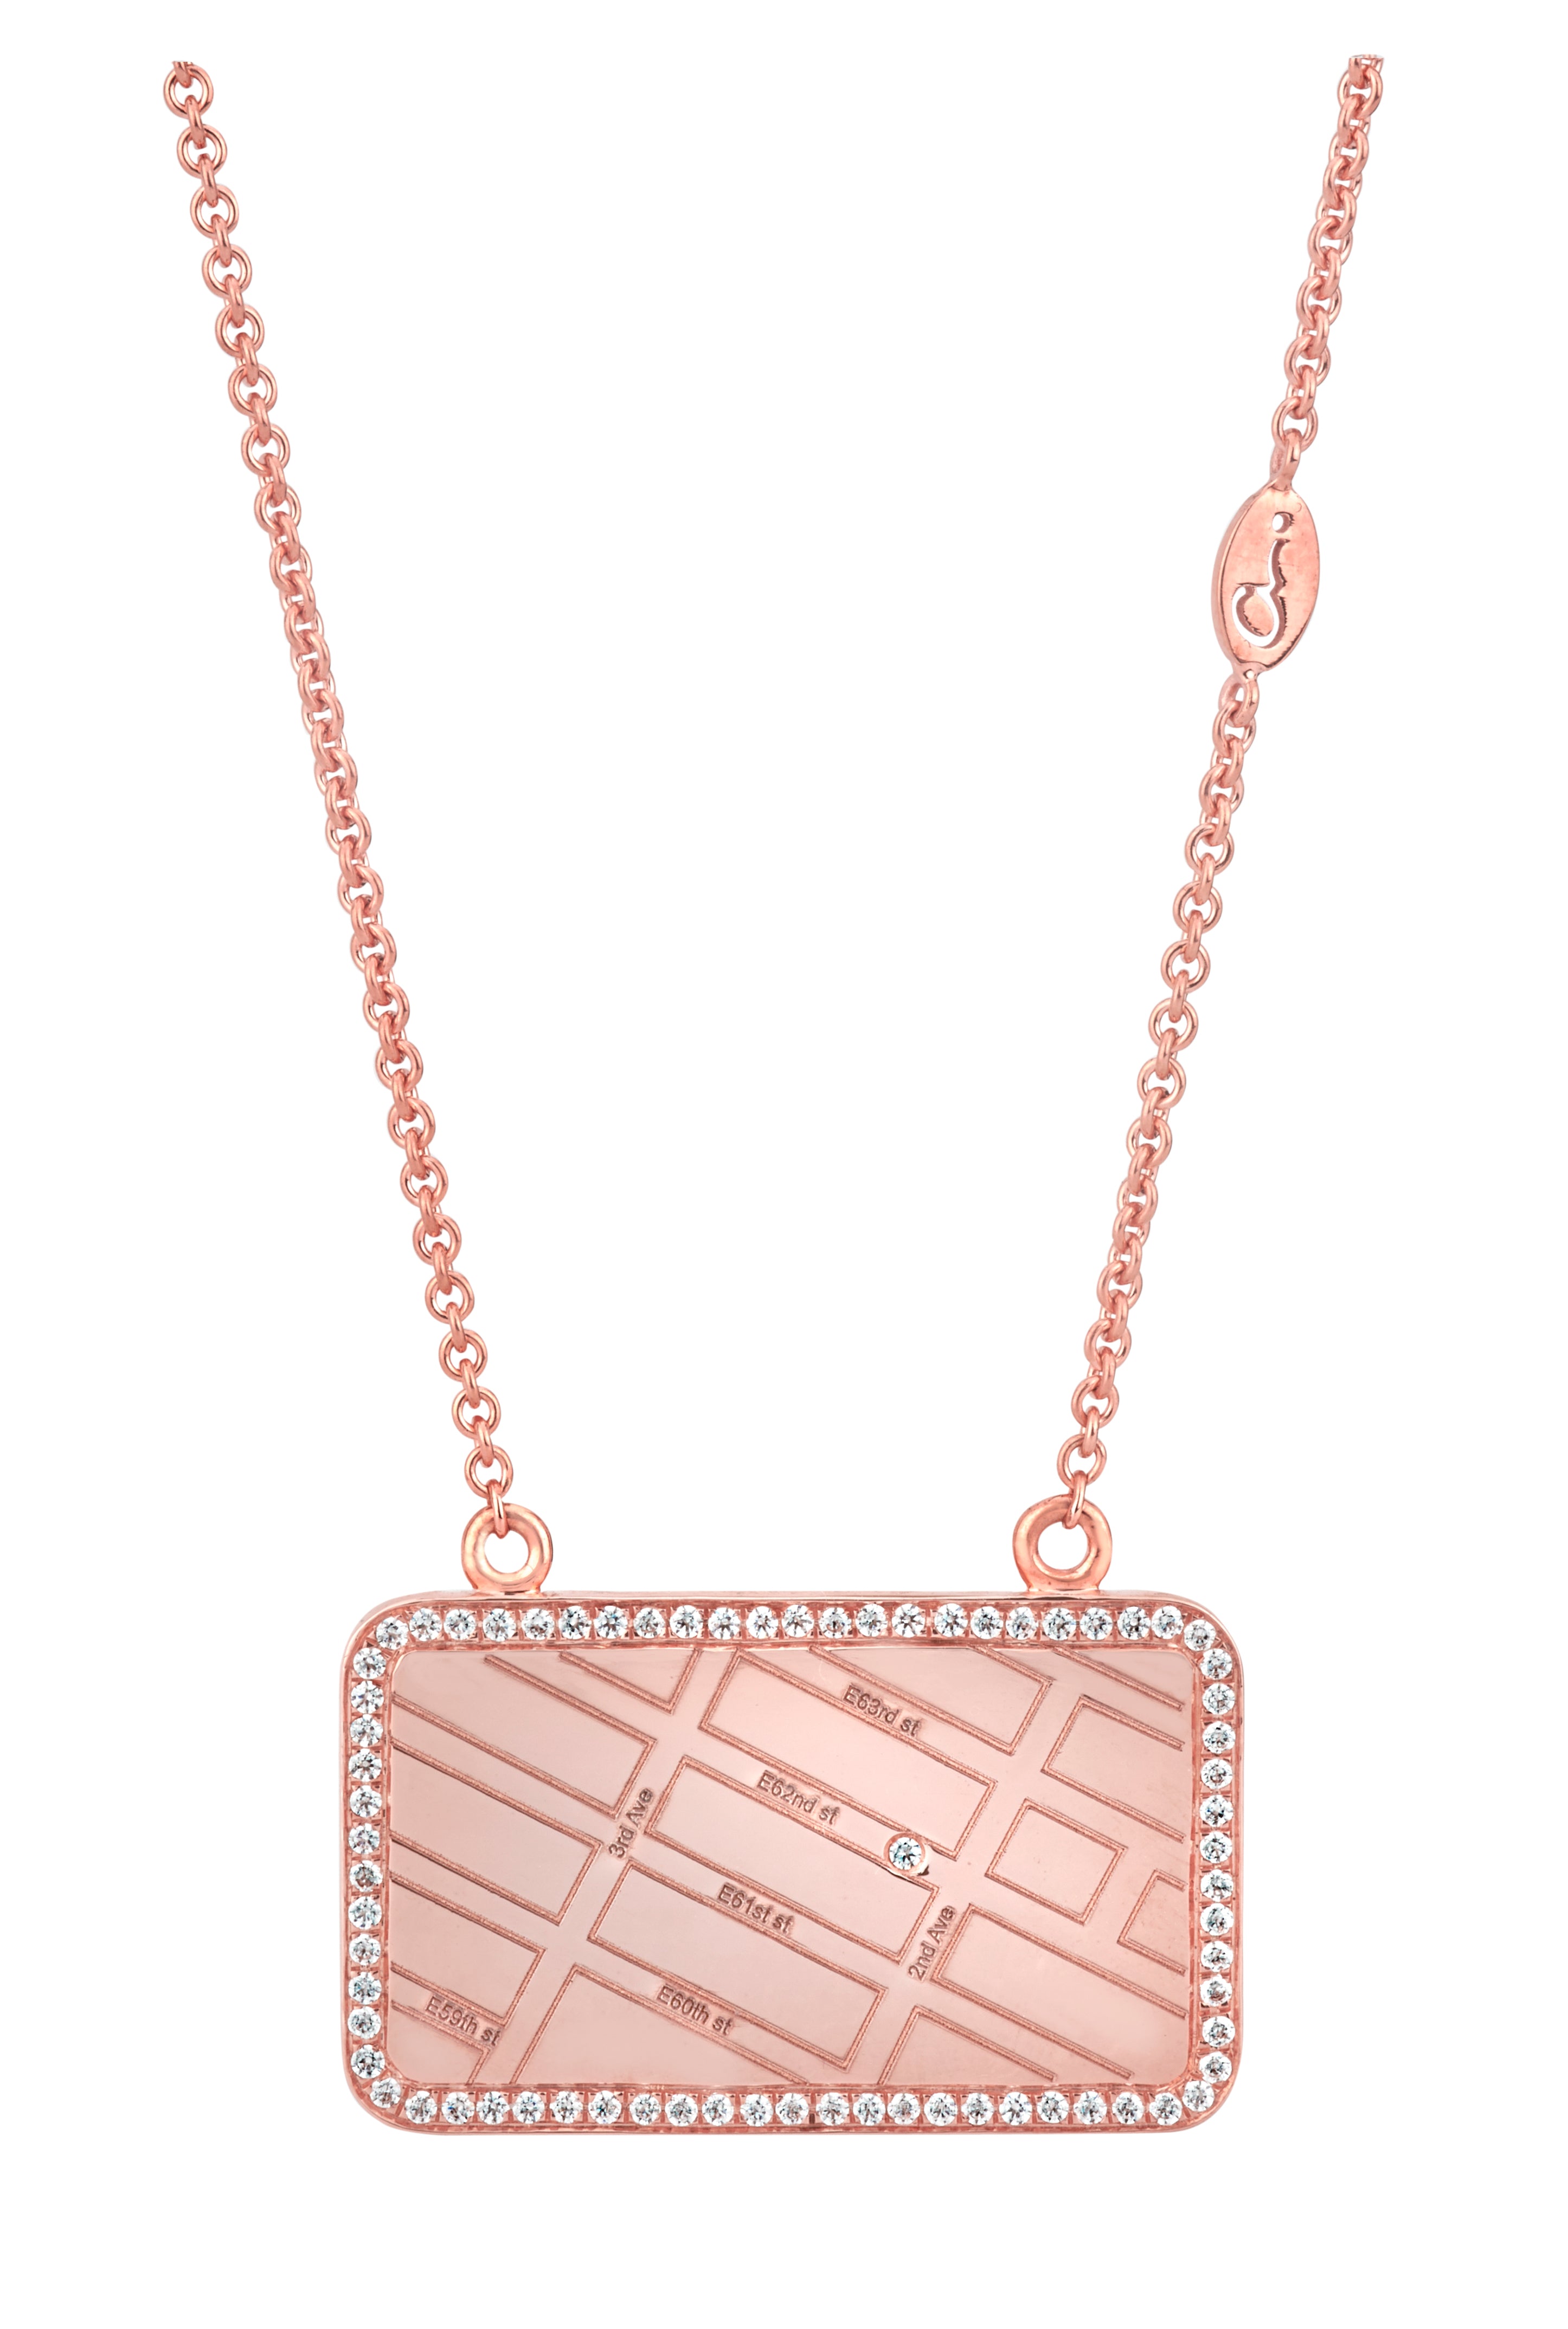 A.JAFFE  ROSE GOLD MAP NECKLACE WITH DIAMONDS